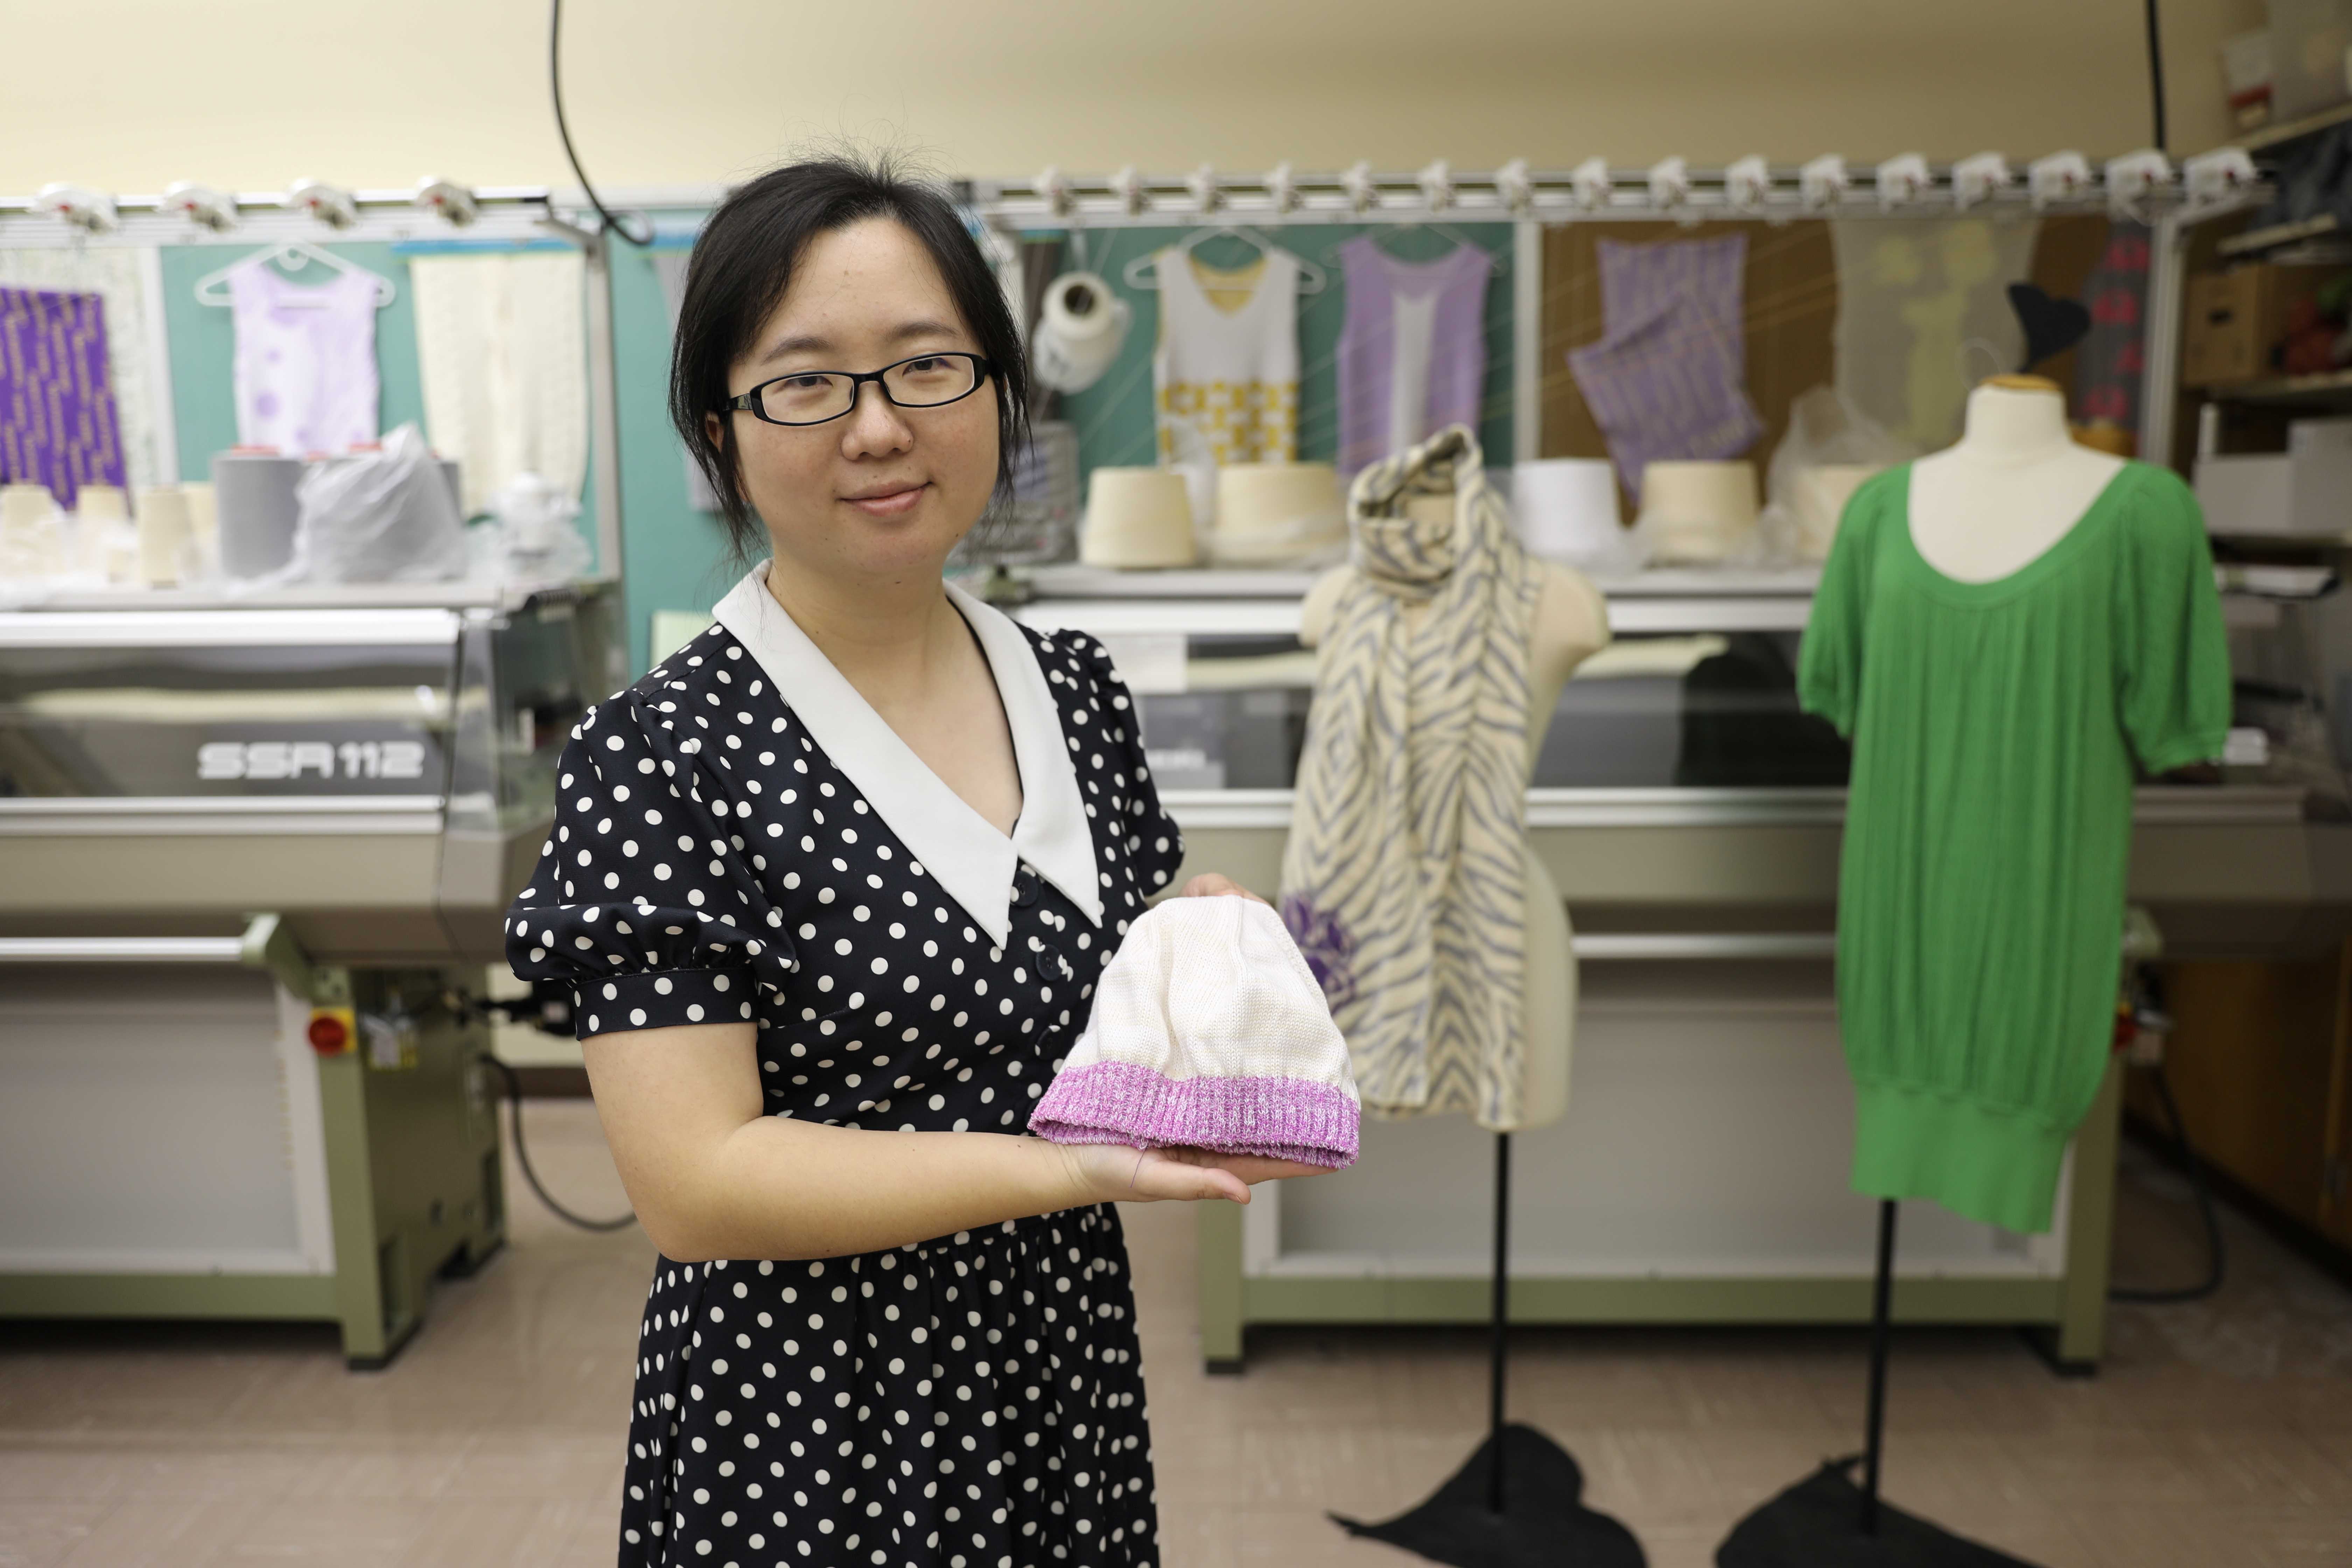 LSU researcher develops smart textile that detects fevers in infants